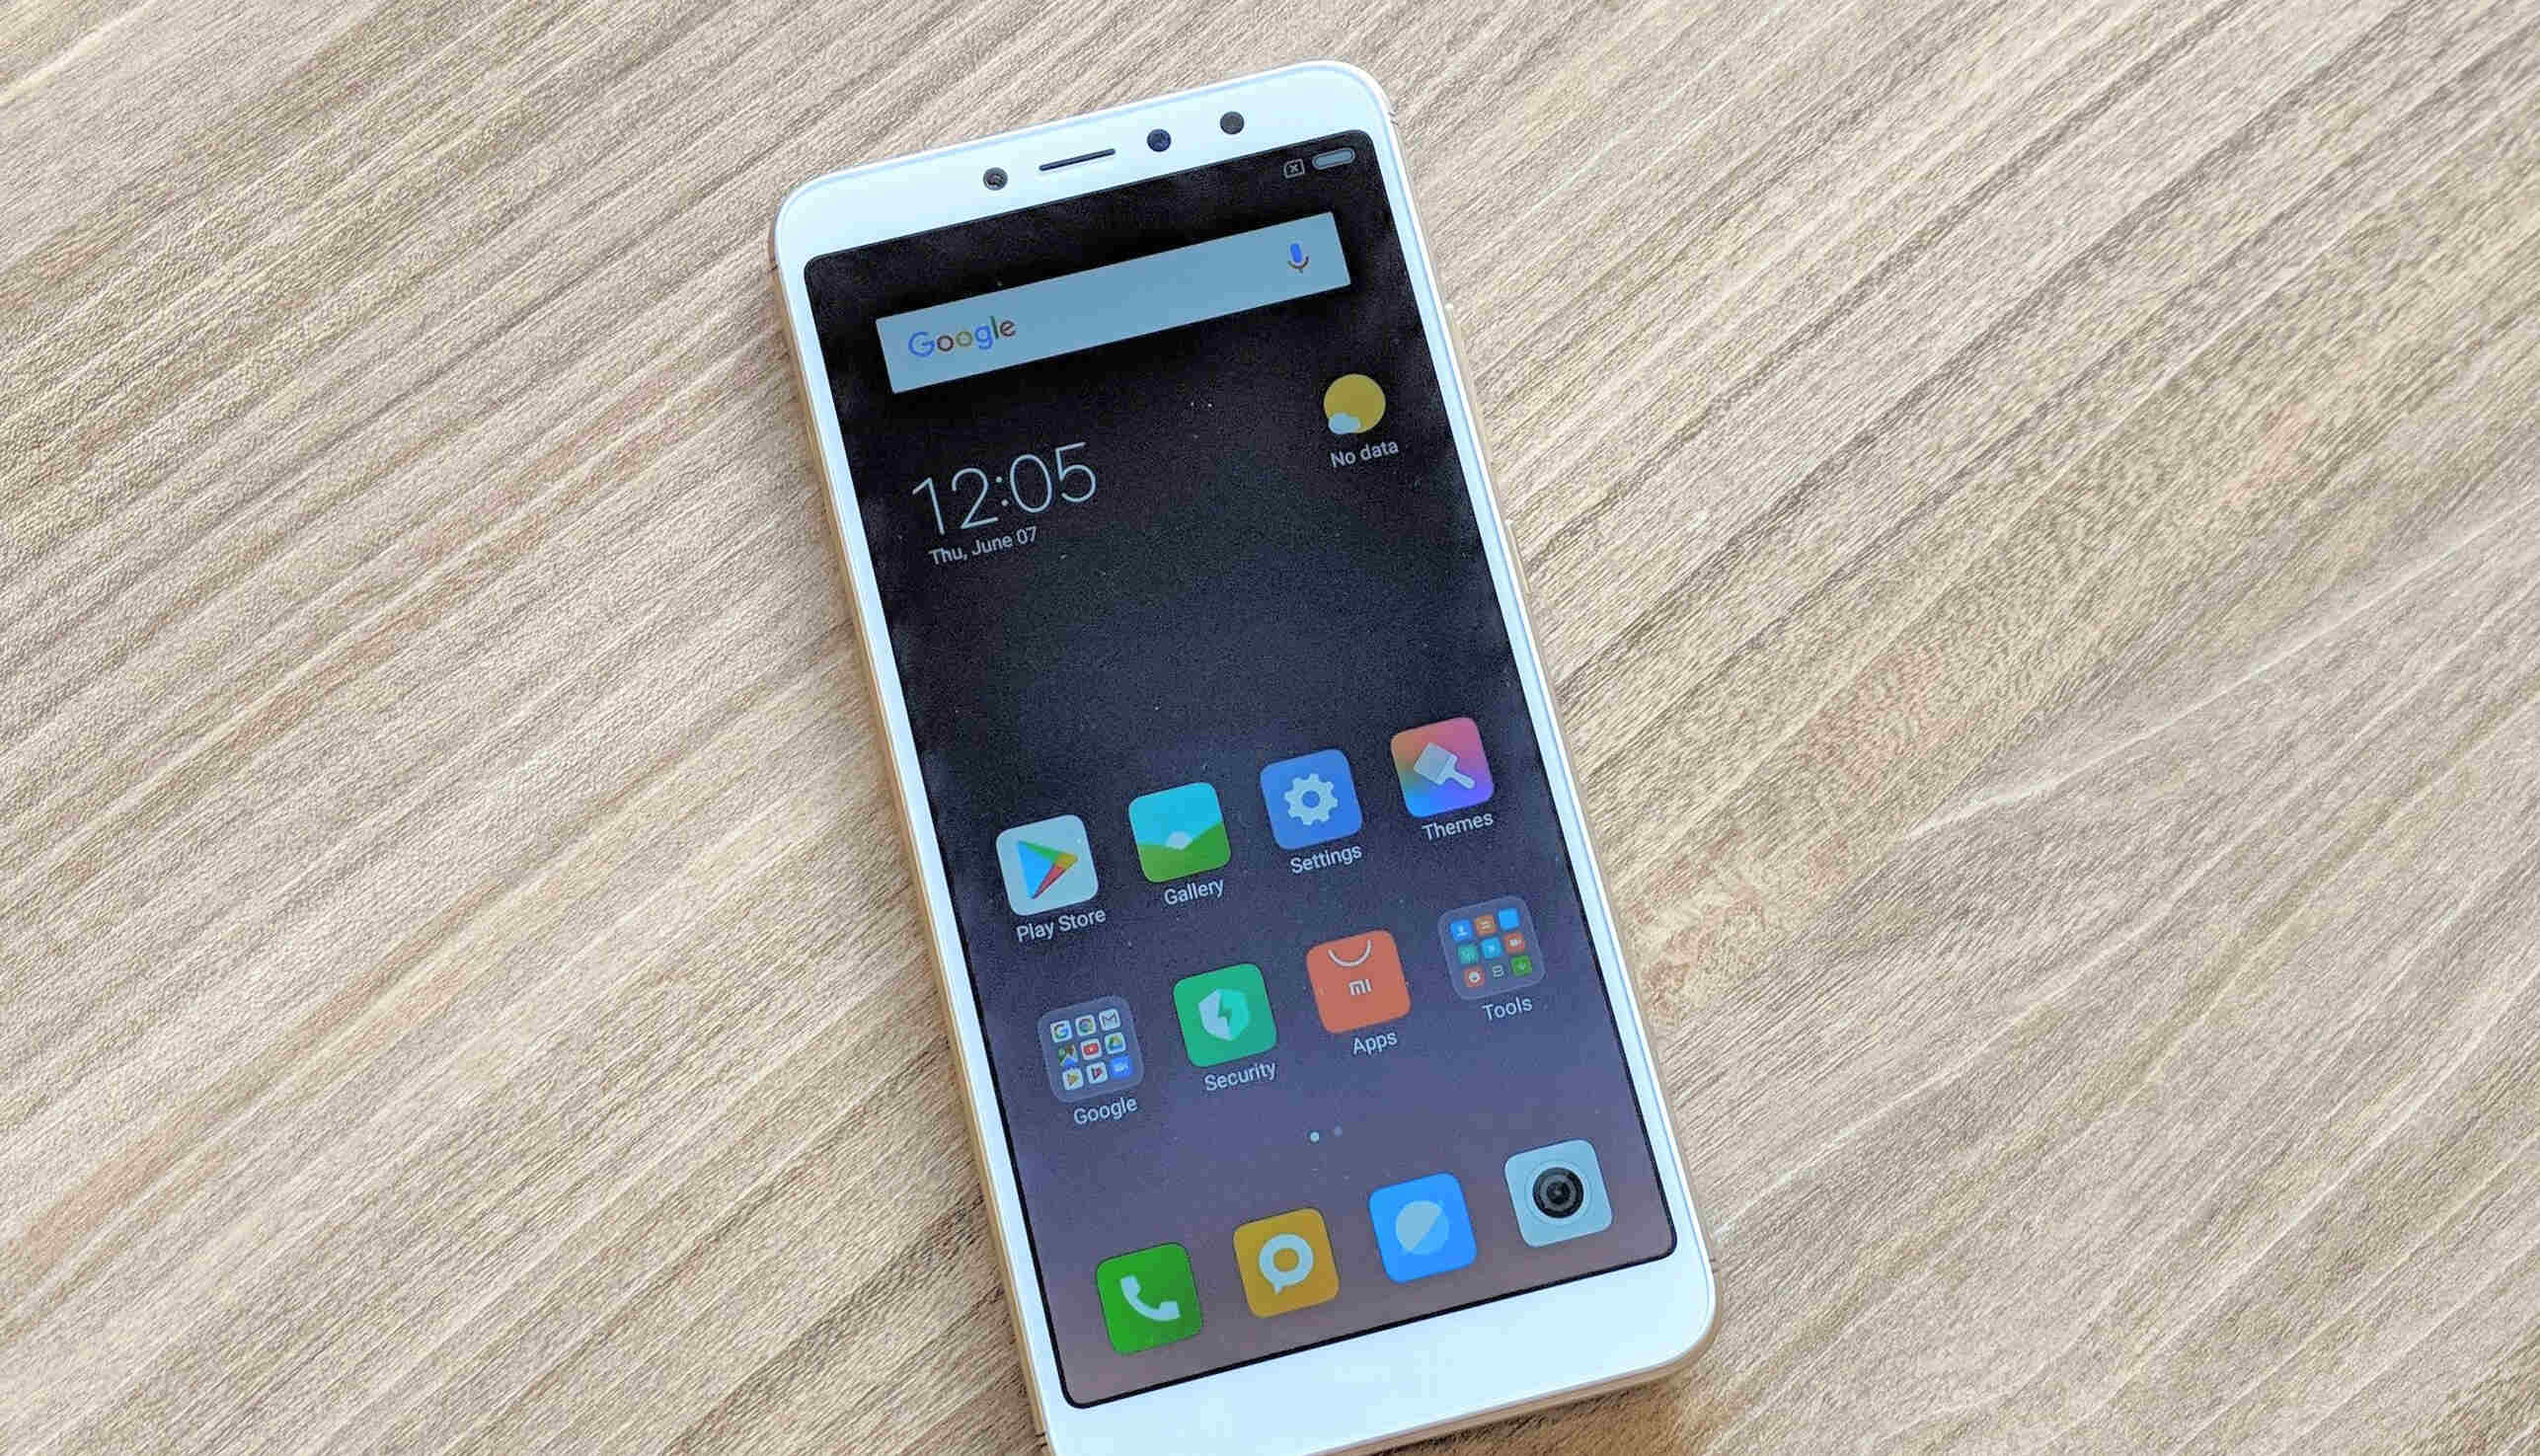 Update Android Version On Redmi Y2: Simple Steps